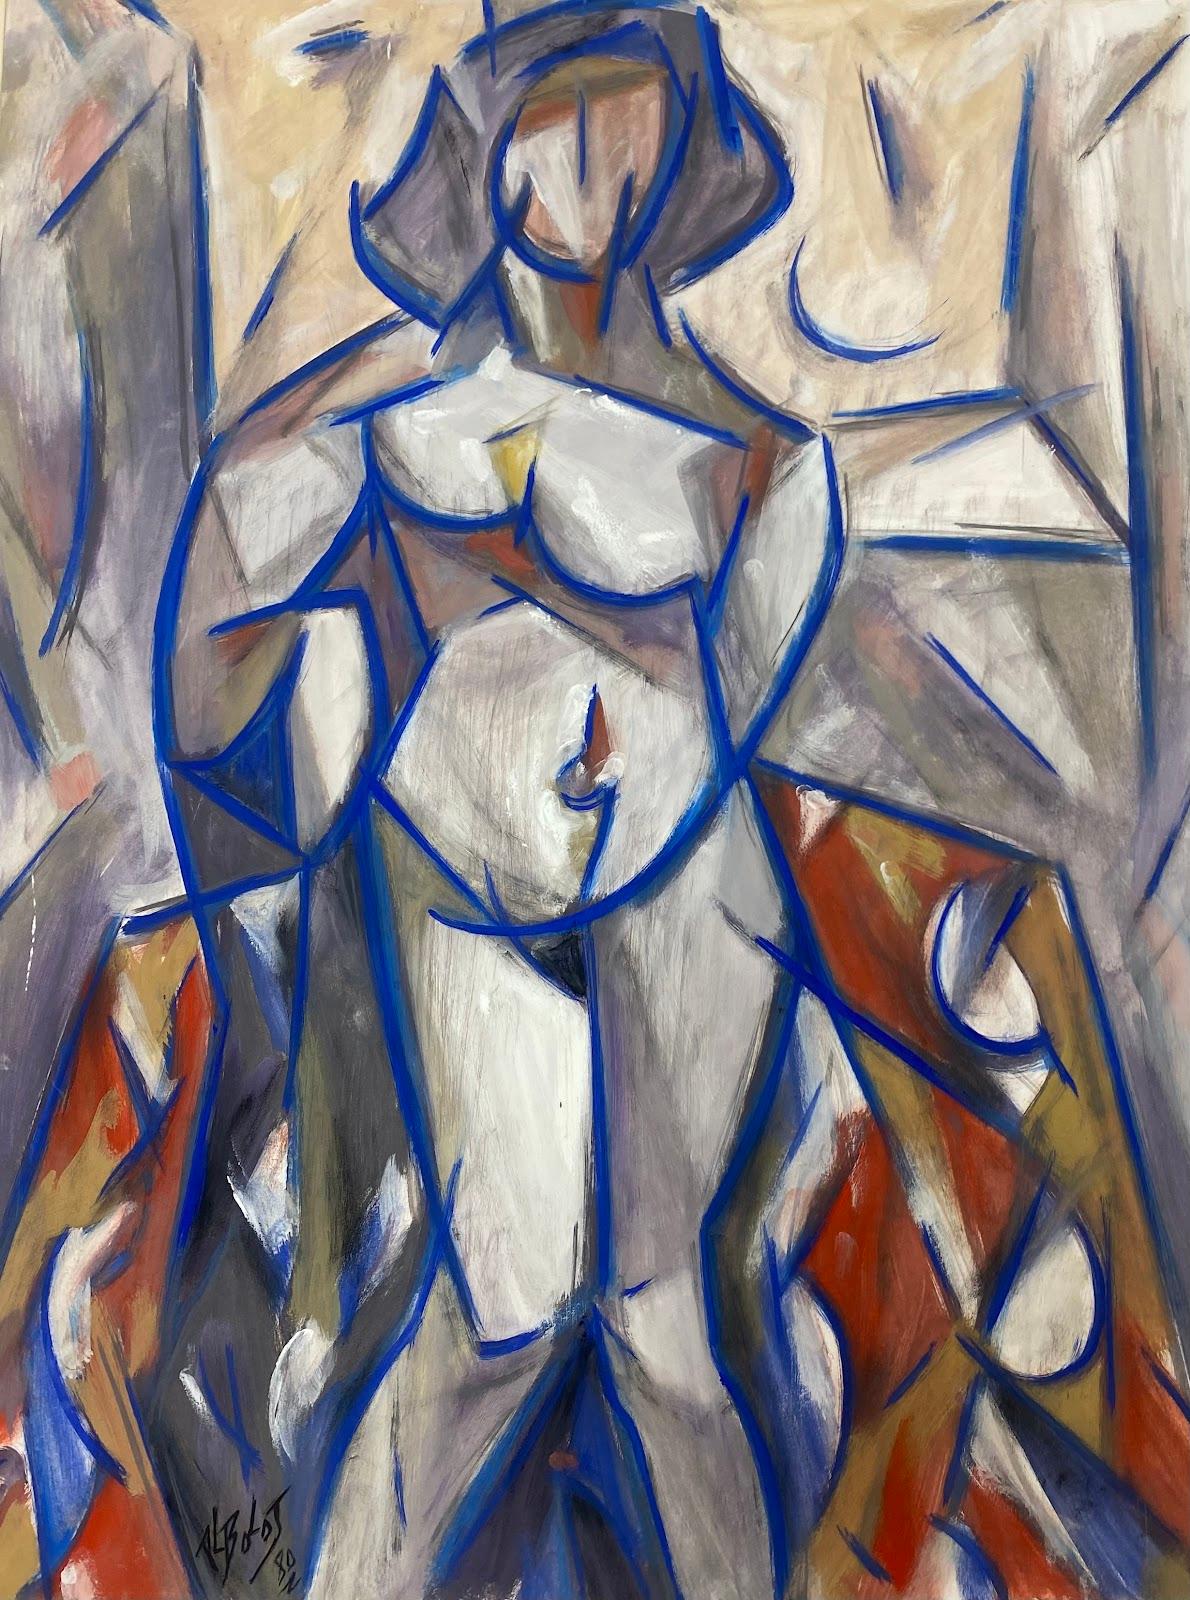 Paul-Louis Bolot (French 1918-2003) Figurative Painting - 20th Century French Cubist Painting Female Nude Blue Abstract